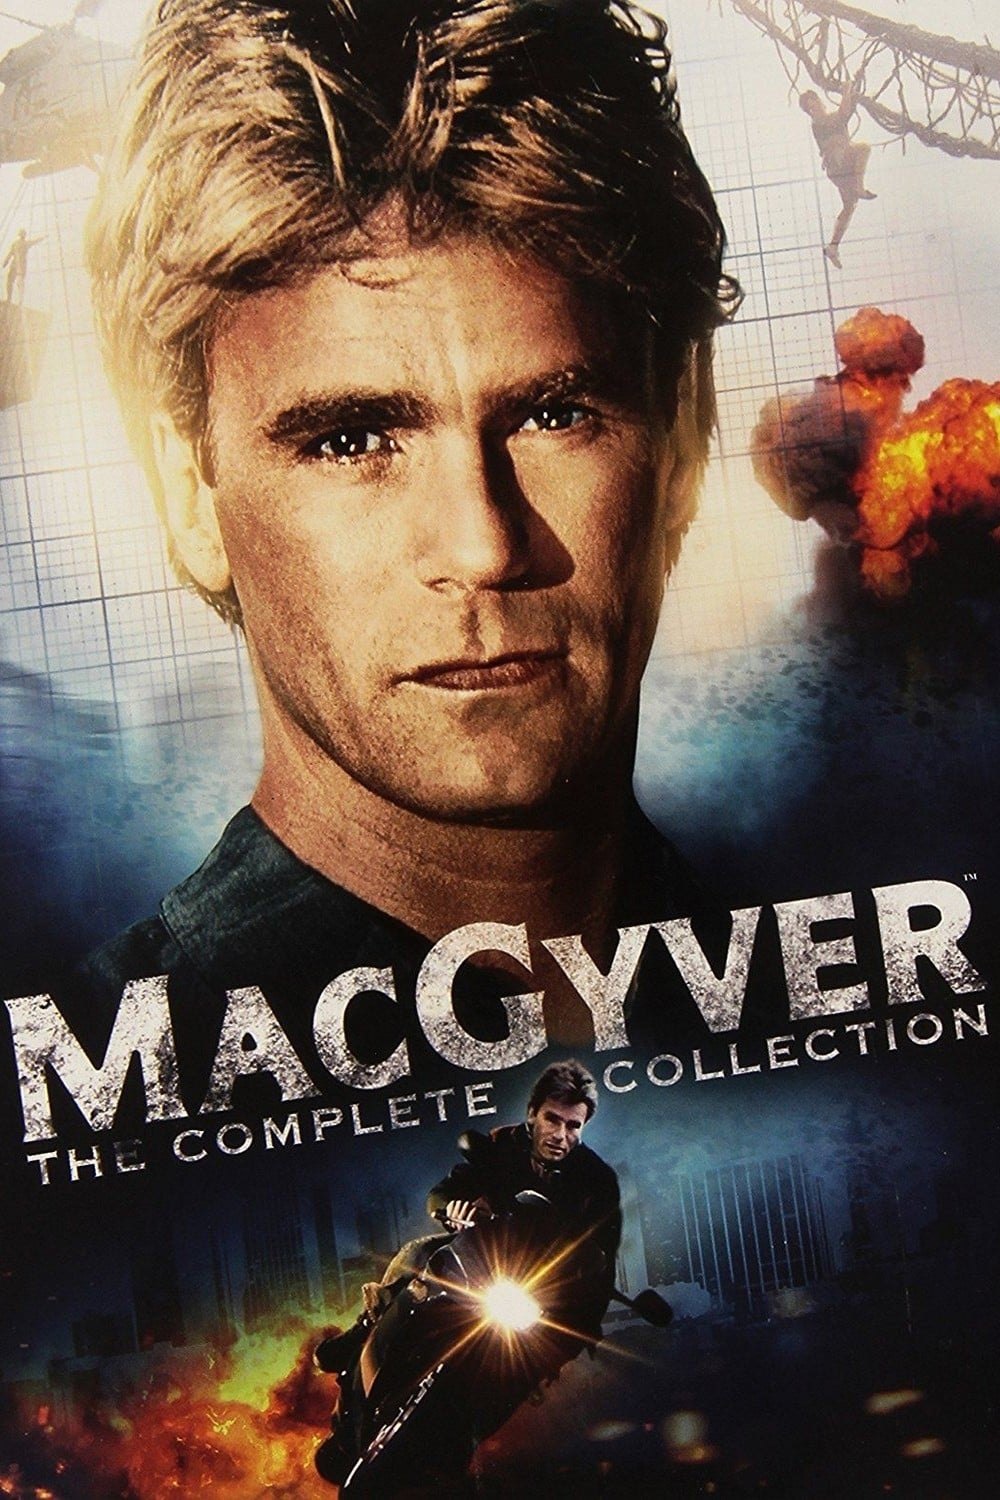 MacGyver (1985) Picture